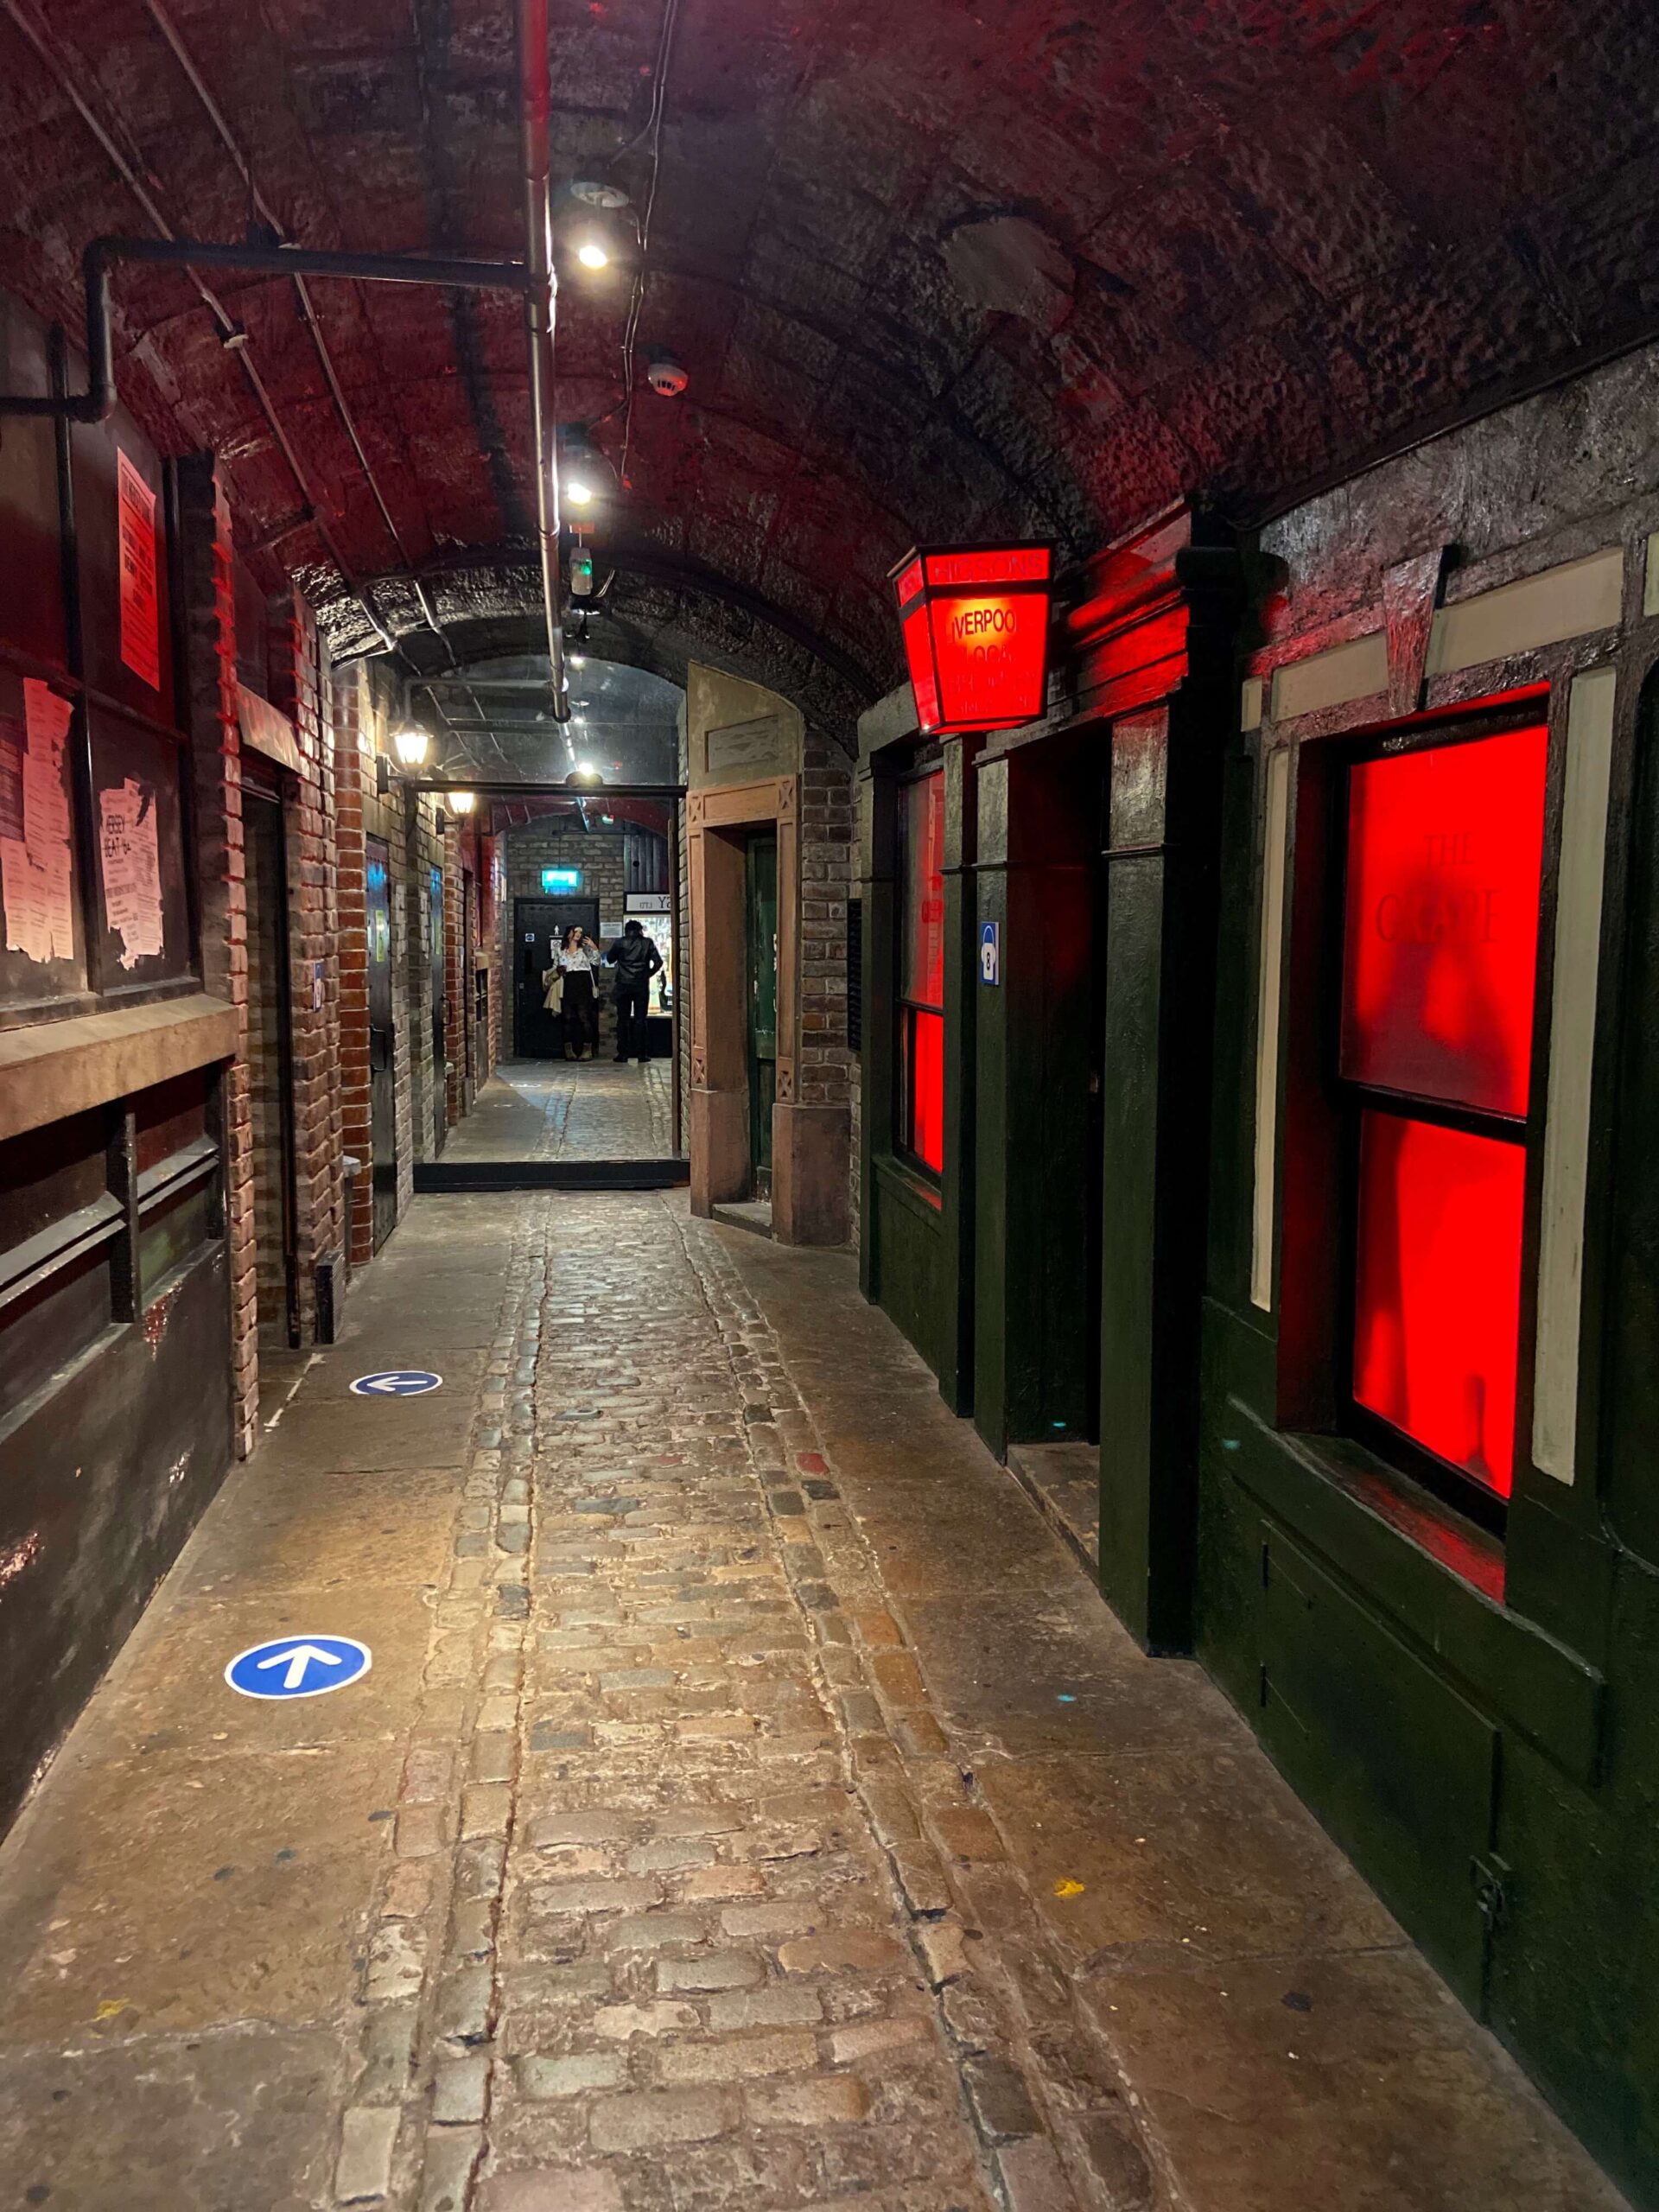 A Replica of Mathew Street and The Cavern